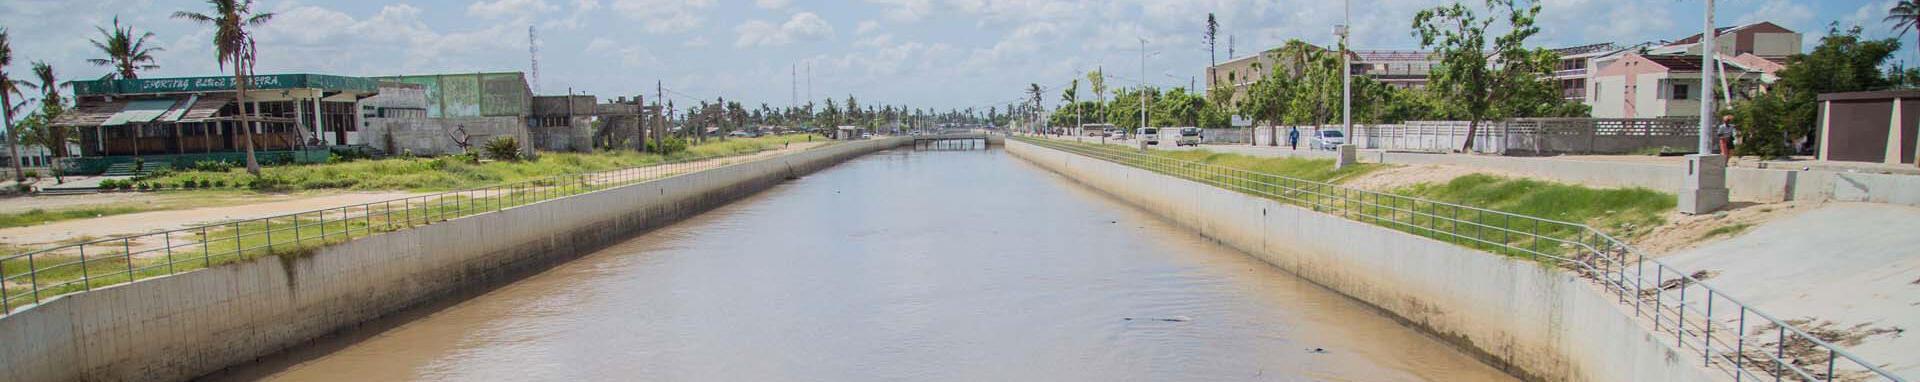 World Bank Photo Collection Image of drainage canals, with installed flood control stations and large retention basin in the city of Beira in Mozambique. Photo: World Bank / Sarah Farhat